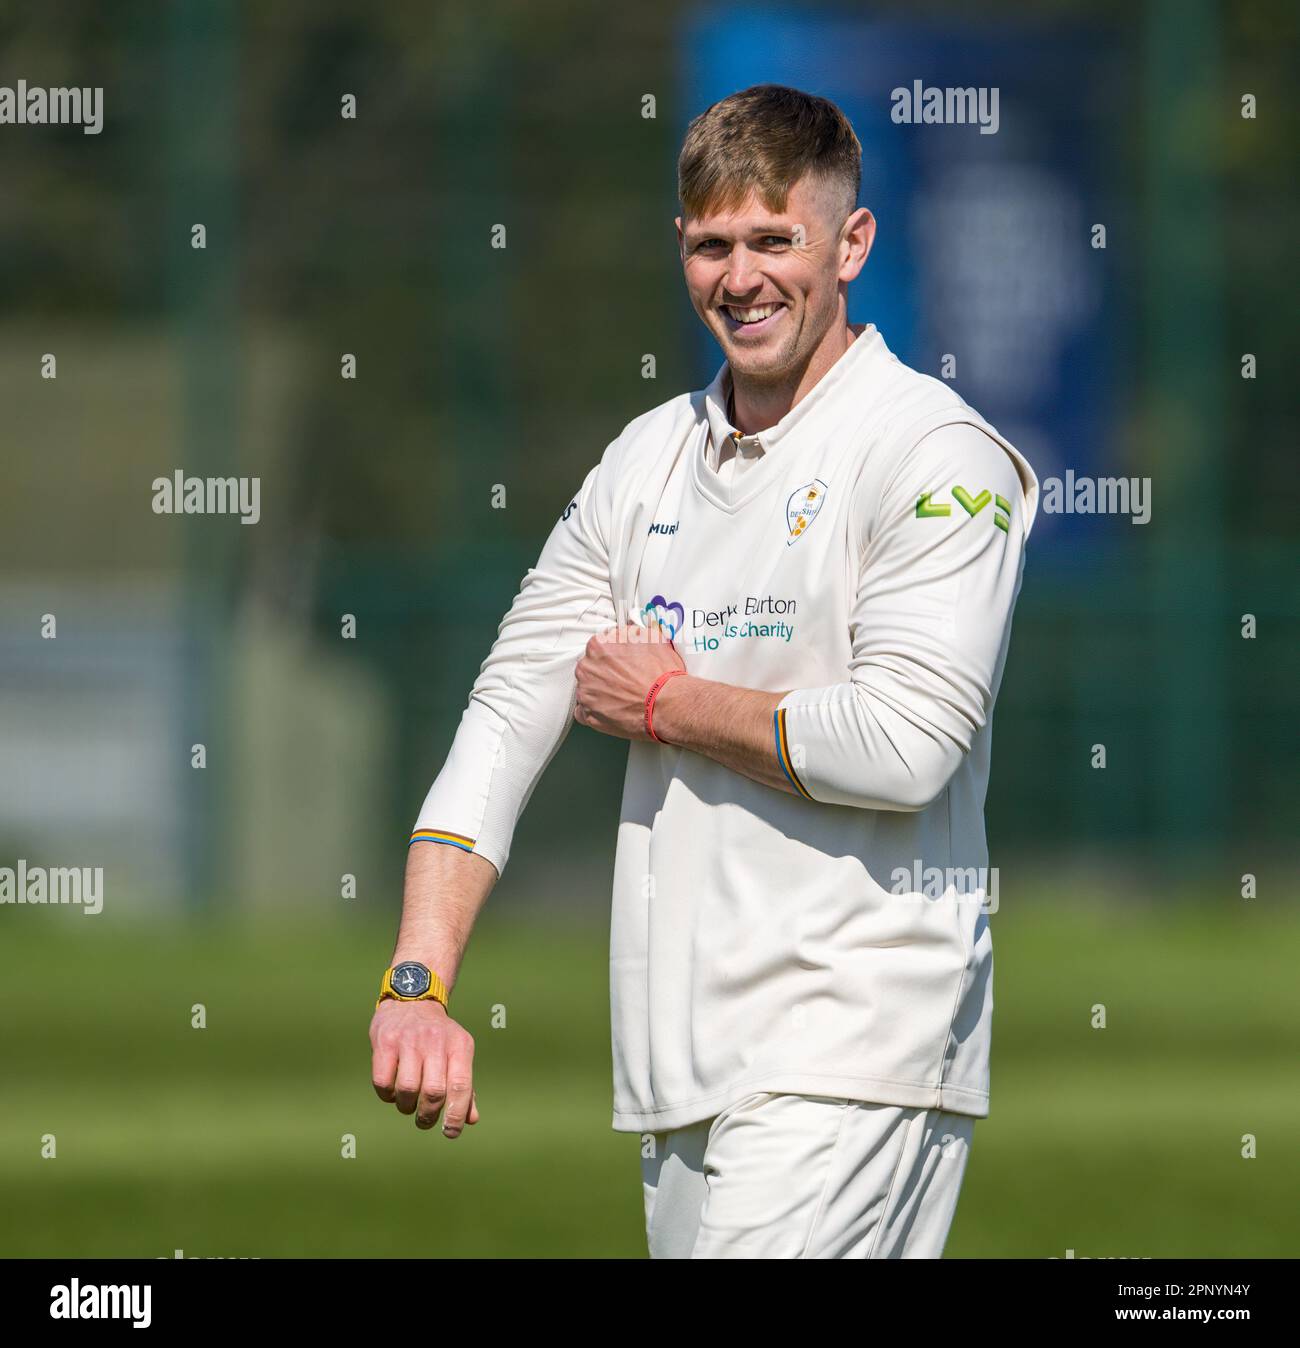 Alex Thomson of Derbyshire in a 2nd XI match against Nottinghamshire Stock Photo